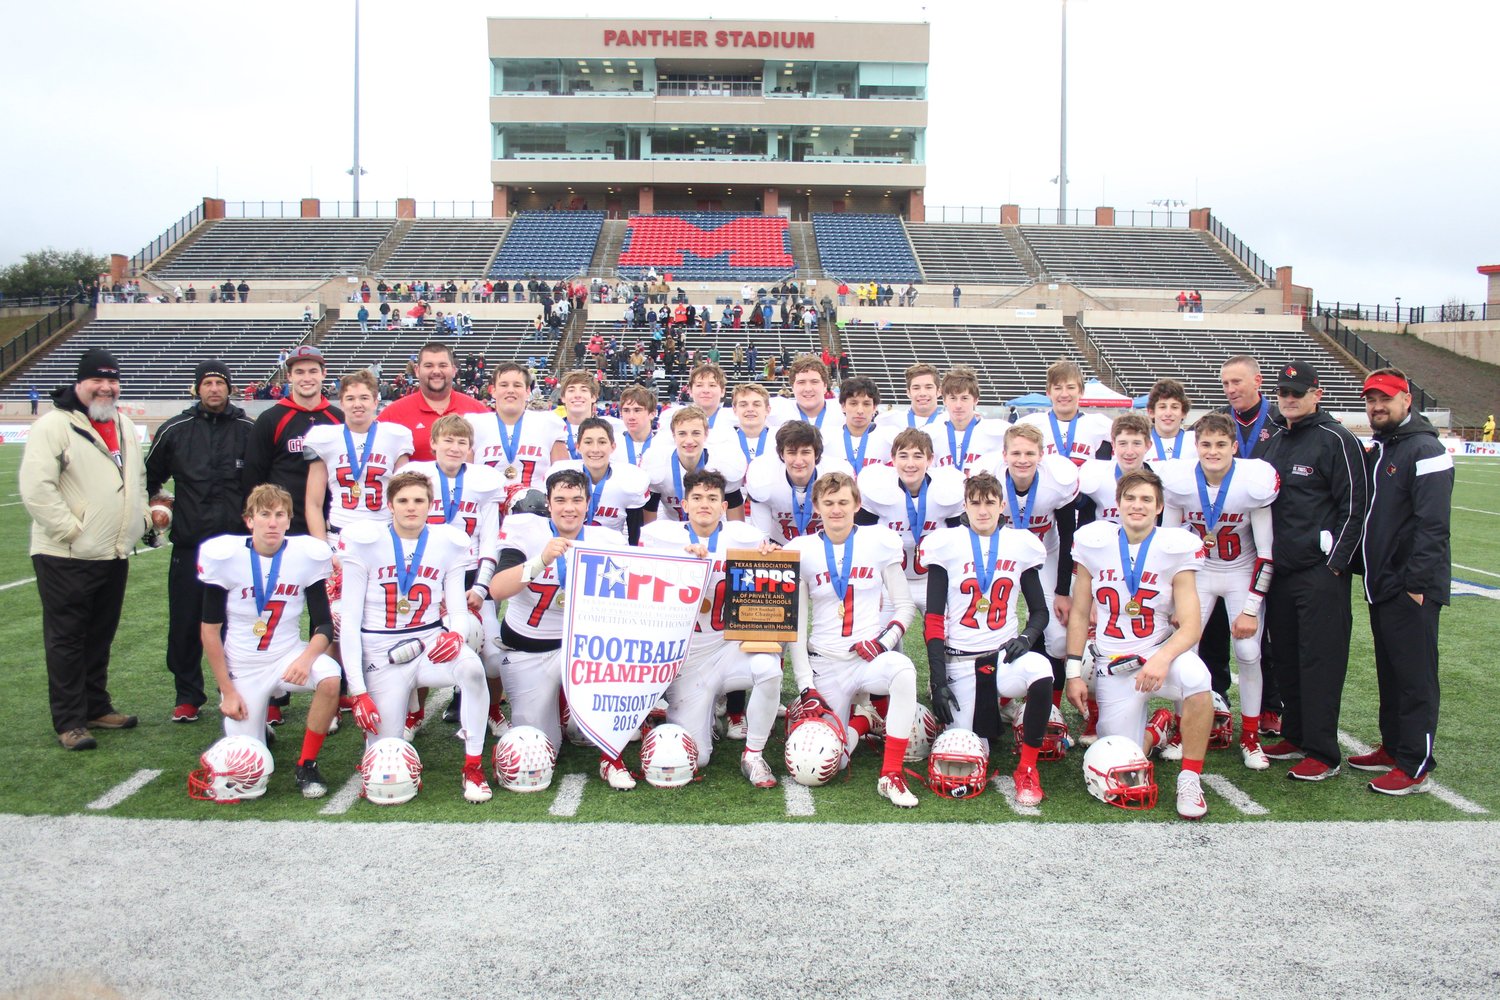 The win marks Shiner St. Paul seventh TAPPS football championship in school history.